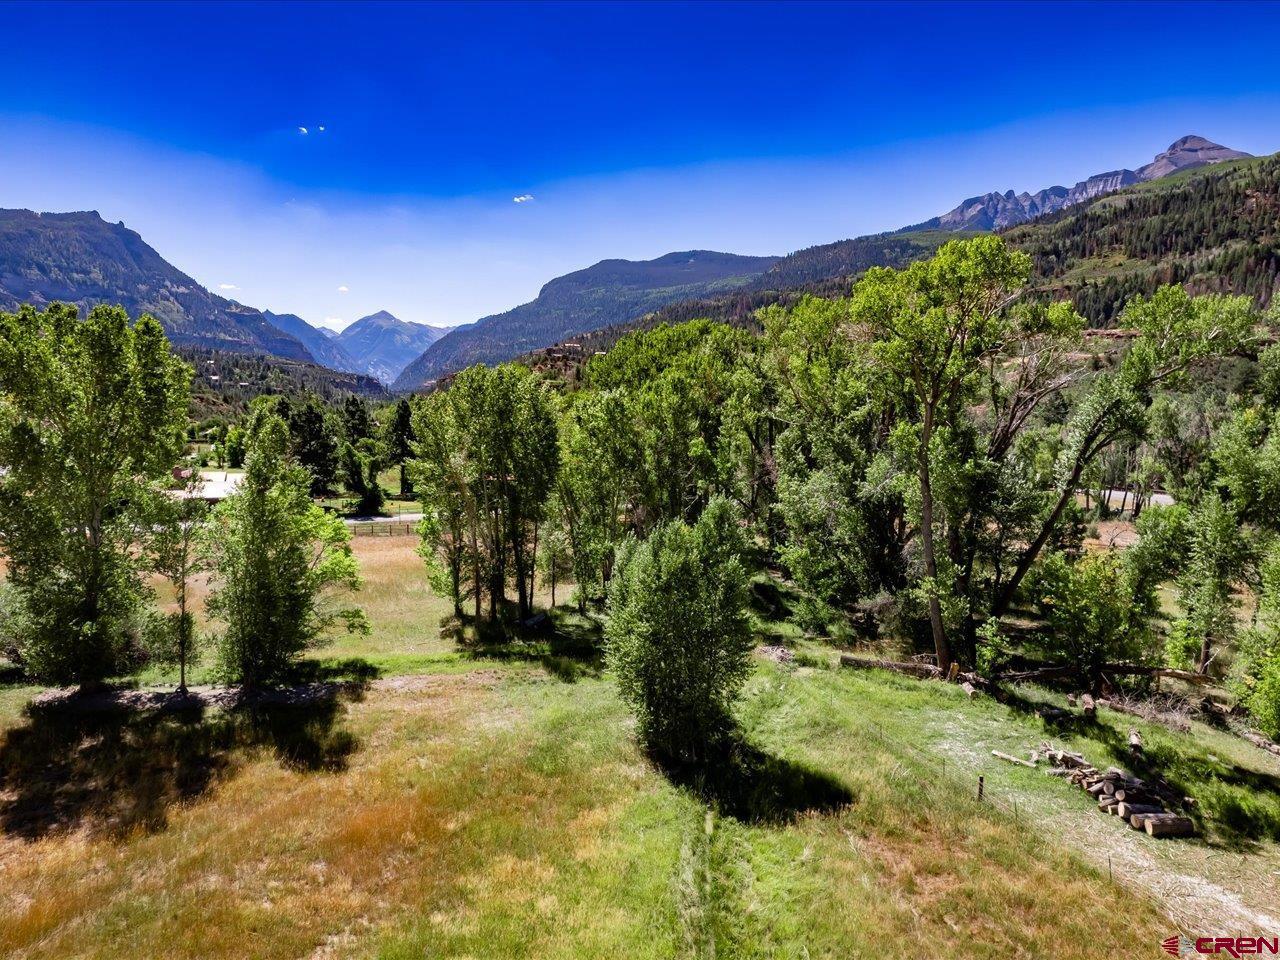 Build your dream home on this spectacular 8.125 acres of prime land in the heart of the San Juan Mountains on the valley floor between Ridgway and Ouray. The Uncompahgre River runs through the western boundary line, and a water storage pond is situated at the Northern boundary line which can supply plenty of irrigation water. Property is fenced along the boundary lines on three sides. Amazing views of Mt. Abrams and beautiful red canyon walls. Easy access to Ouray, Ridgway, Telluride and Montrose. Utilities can be readily accessed for tapping into and there are several lovely and flat building sites. You'll be able to take advantage of the endless outdoor activities, abundant festivals, unique shopping and much more with this sought after yet hard to find piece of paradise! Fiber optic was just installed at the property line. This incredible property won't last long so, make your showing appt. today!